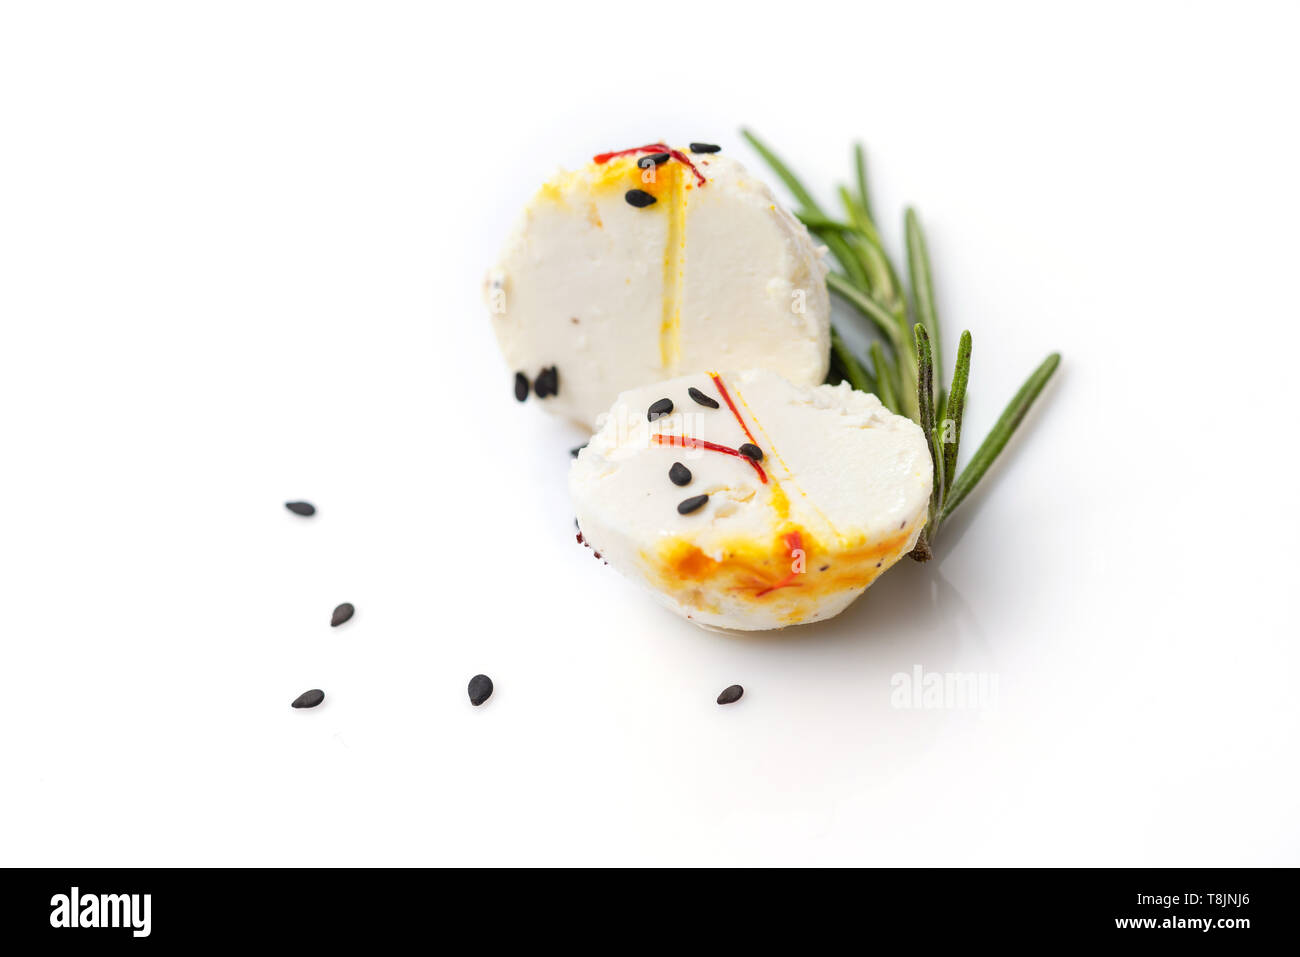 Two halves of cheese ball with sprig of thyme and sesame on white background. Stock Photo